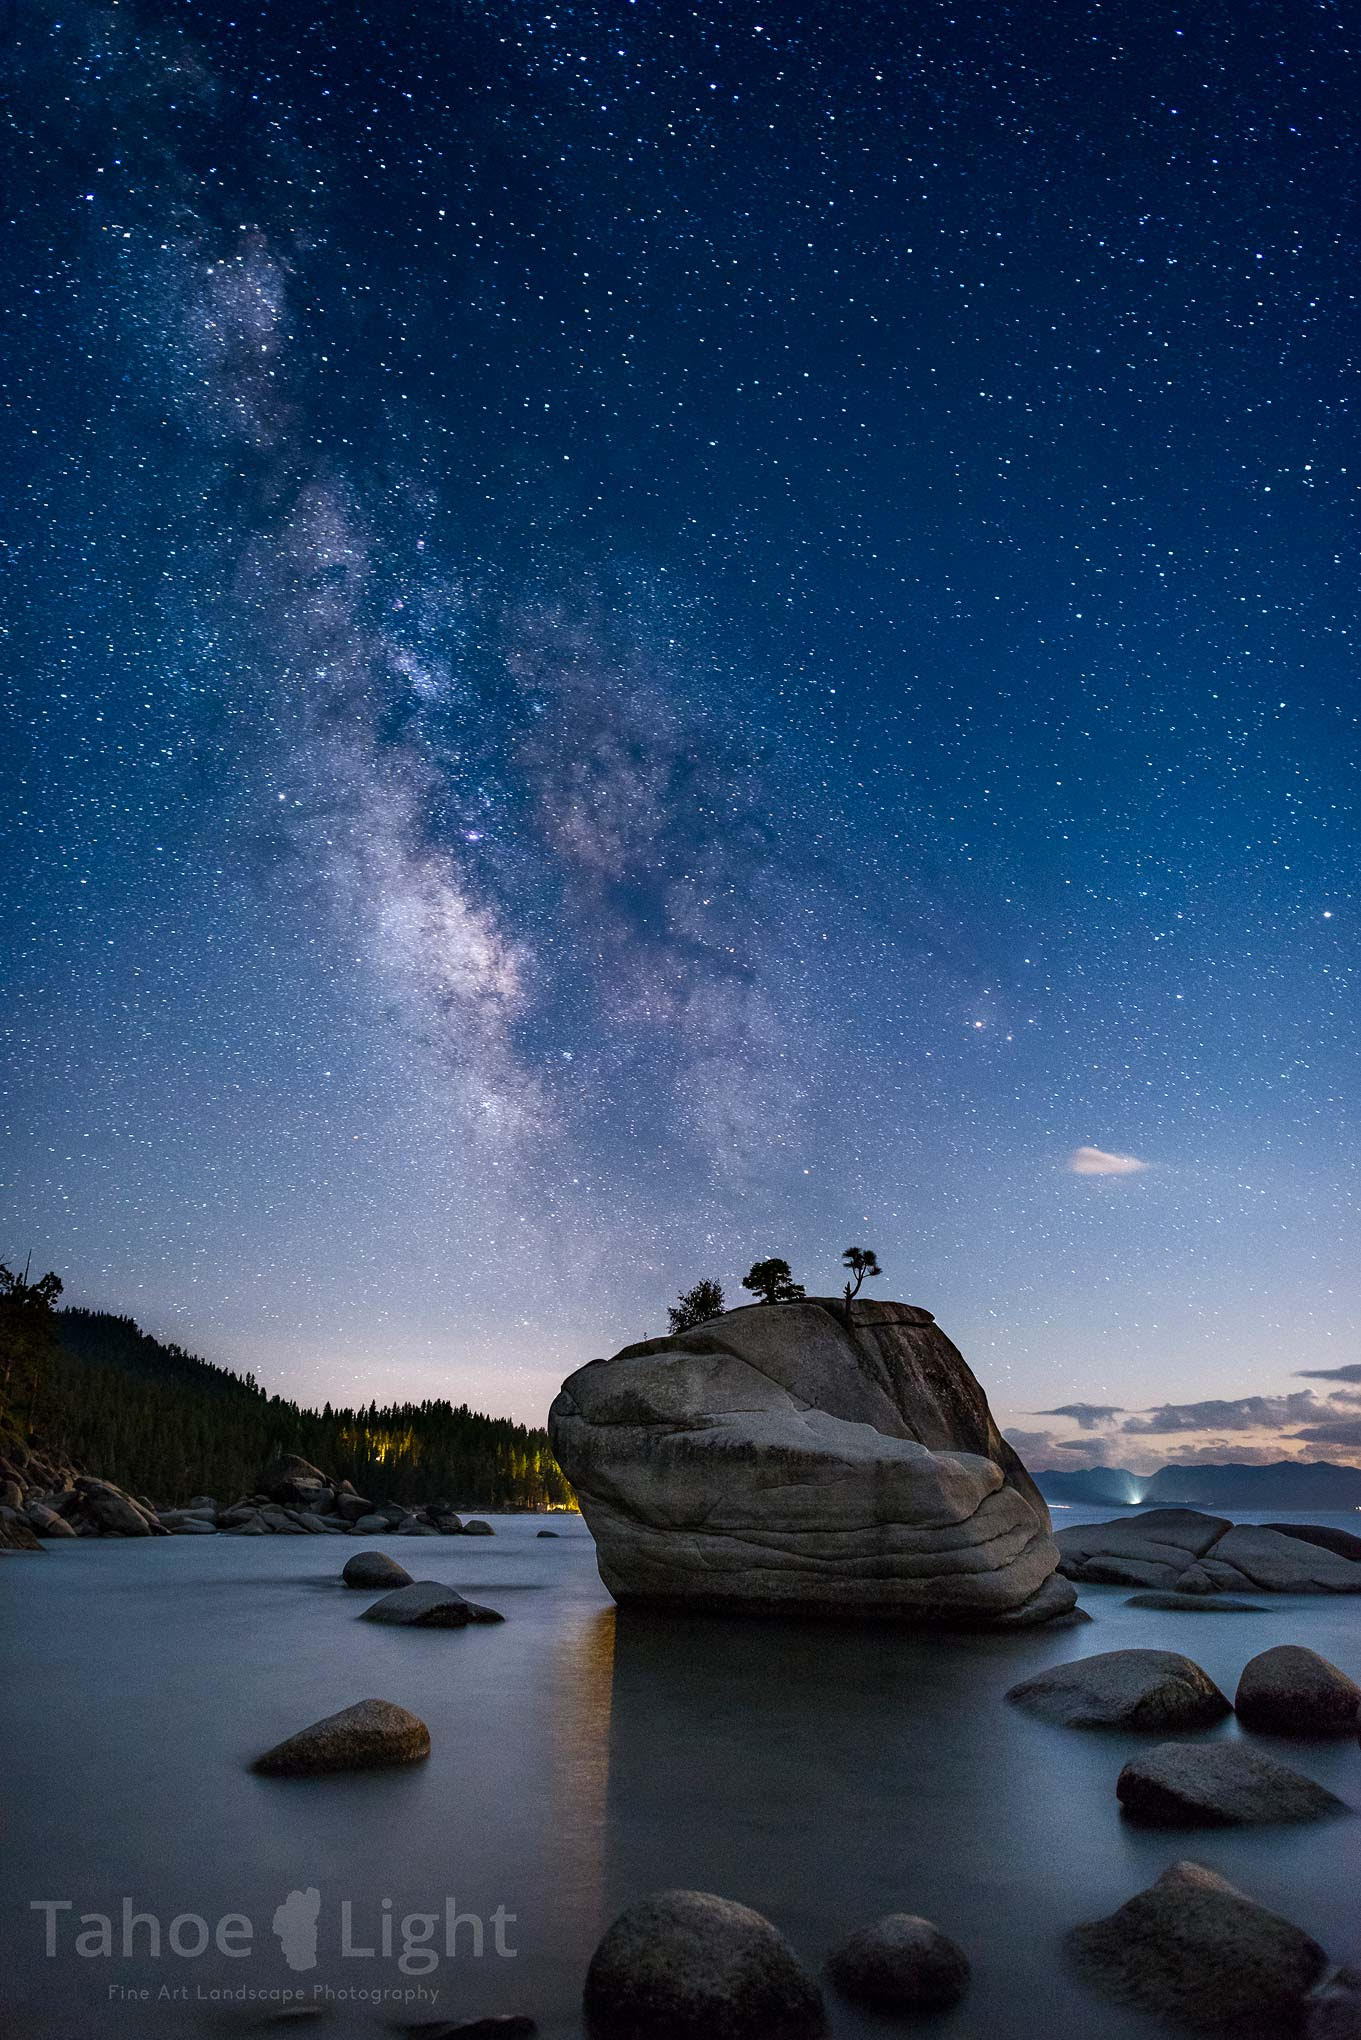 A night sky with stars and the Milky Way in the distance and a rock island in the foreground.  